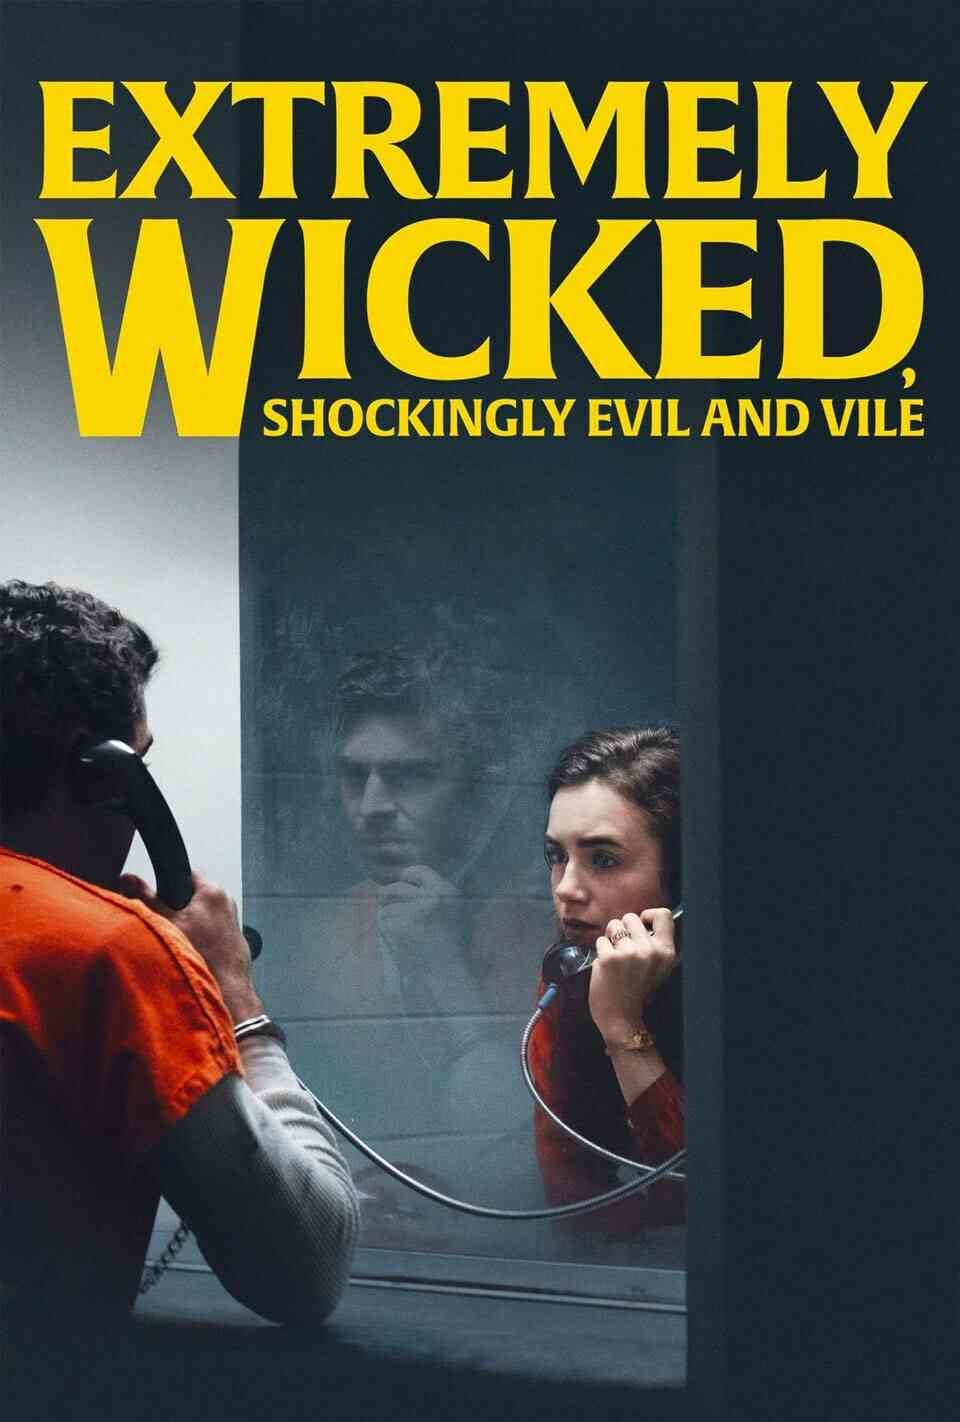 Read Extremely Wicked, Shockingly Evil and Vile screenplay (poster)